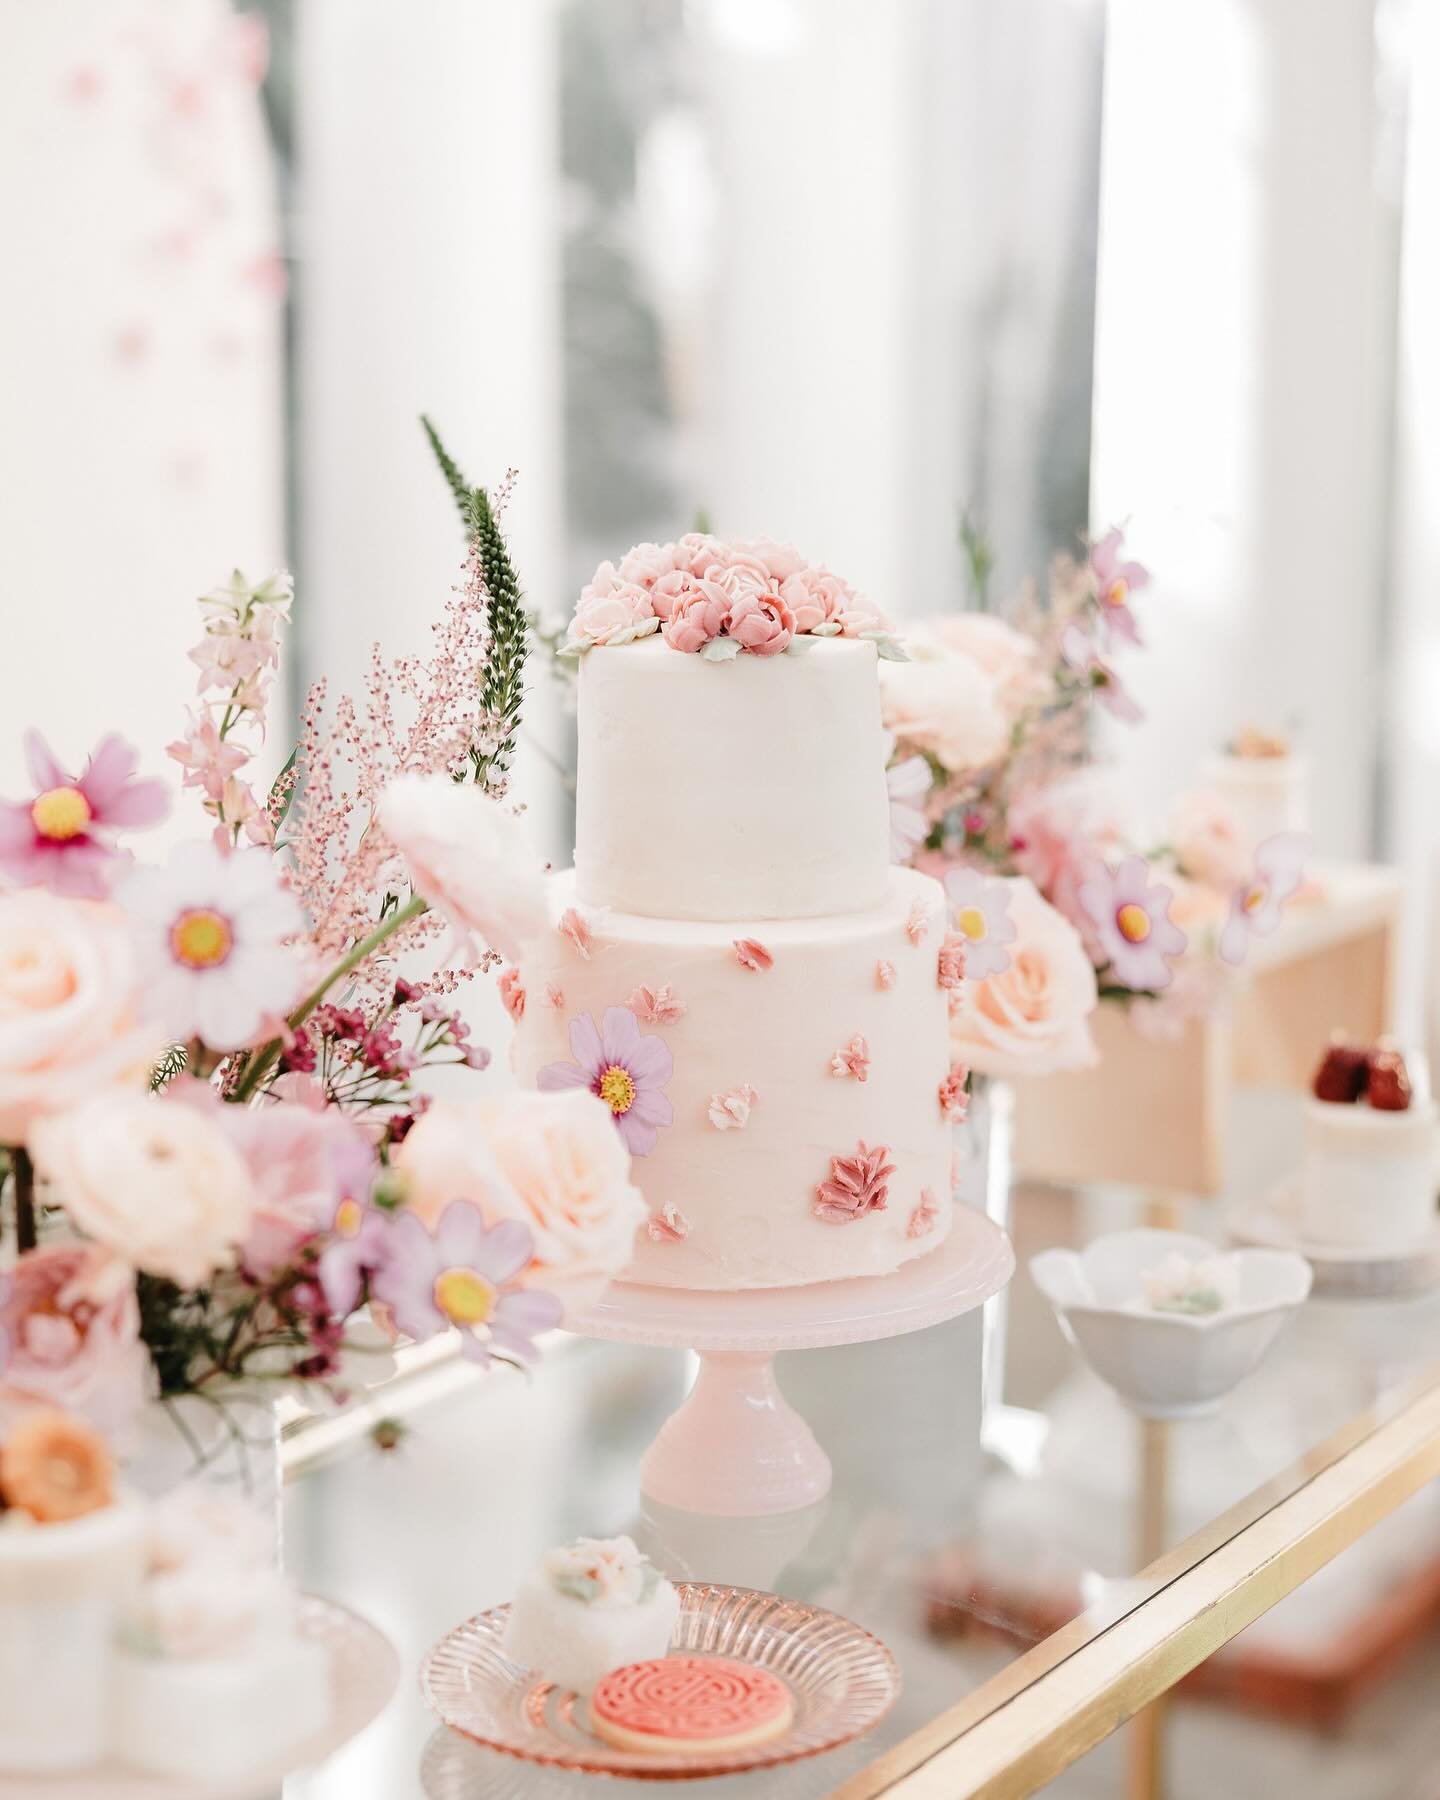 One of our favorite #dohl celebrating the daughter of one of our couples that got married with us over 10 years ago. We love seeing our couples grow into a family.💕🤍

And we especially love the 2 tier #dduk cake😍

@joytheoryco @designbyeunice @the